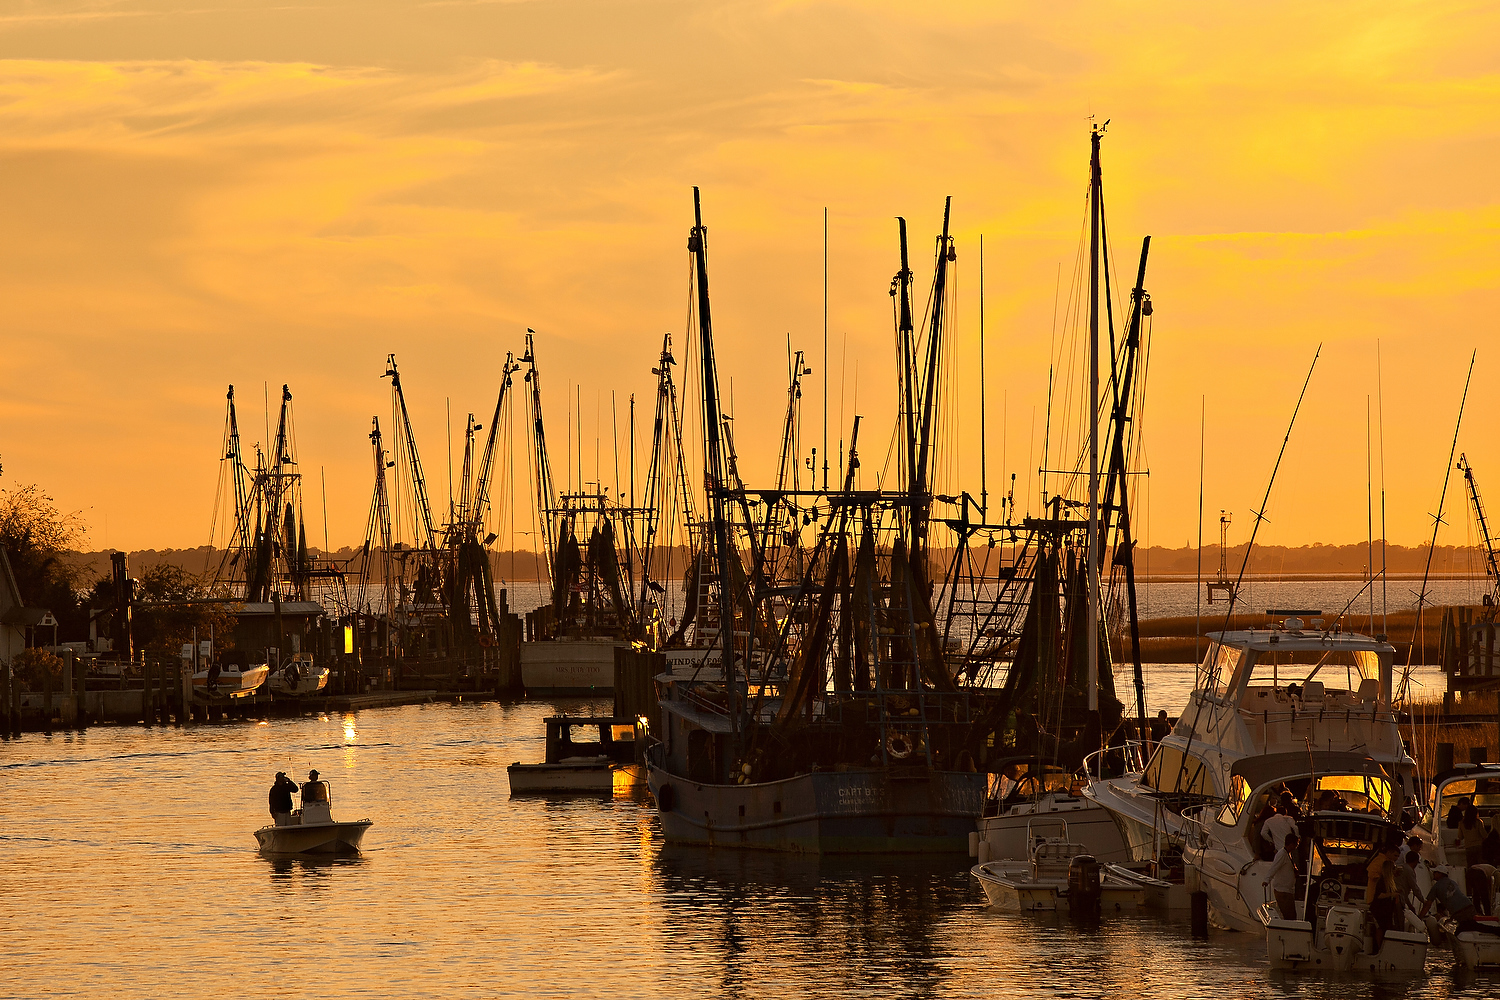  Sunset over the shrimp boats on Shem Creek in Mt Pleasant, SC. 